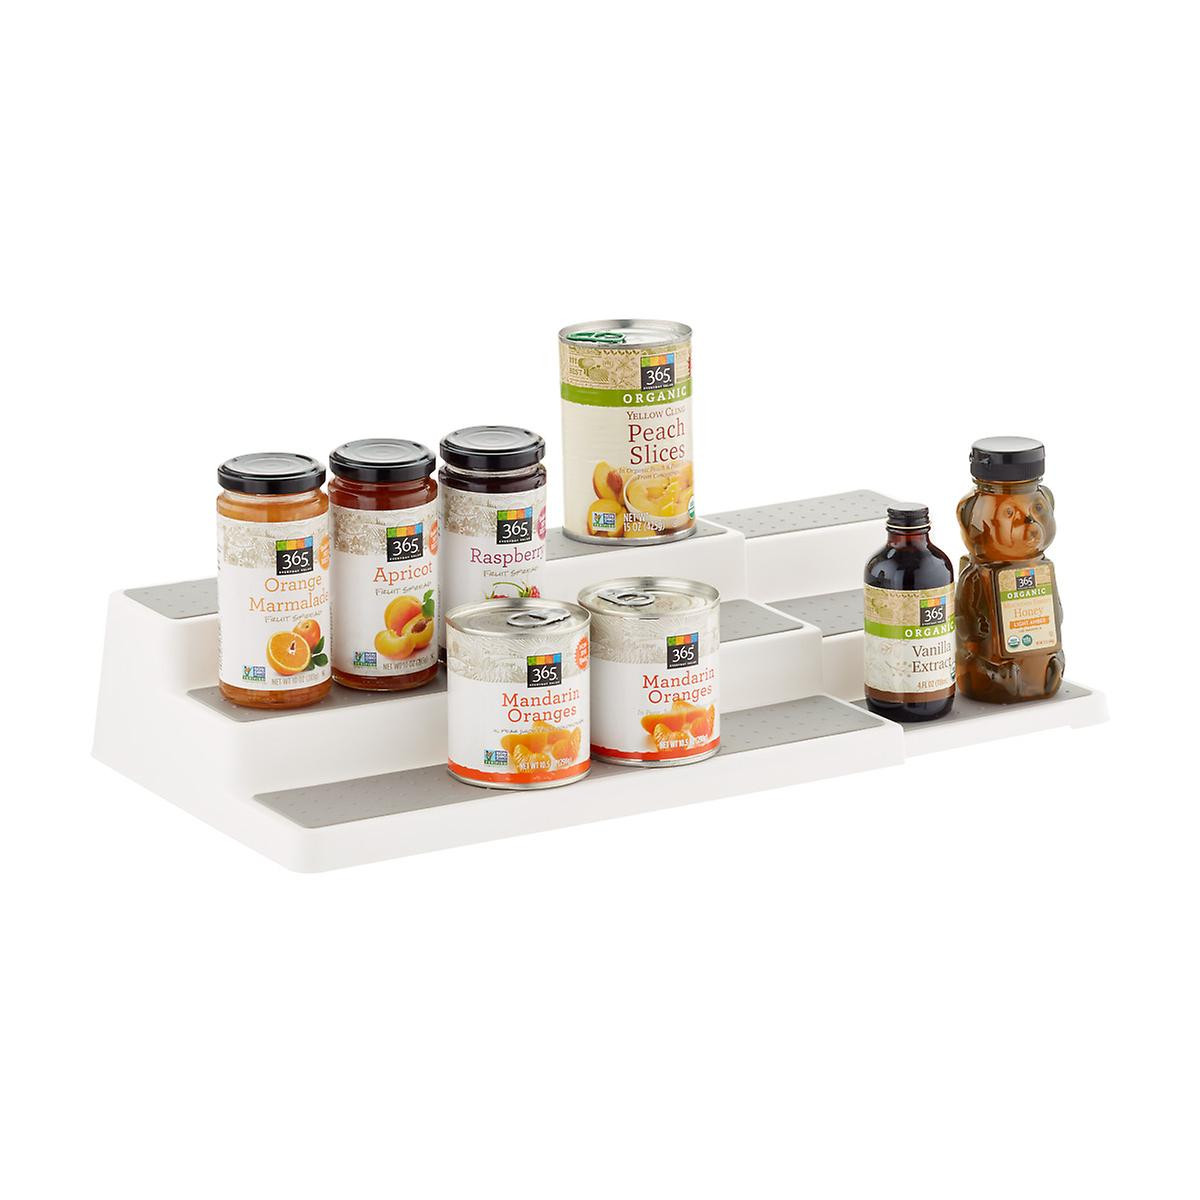 Container Store Kitchen Cabinet Organizer
 madesmart Expandable Pantry Shelf & Spice Organizer